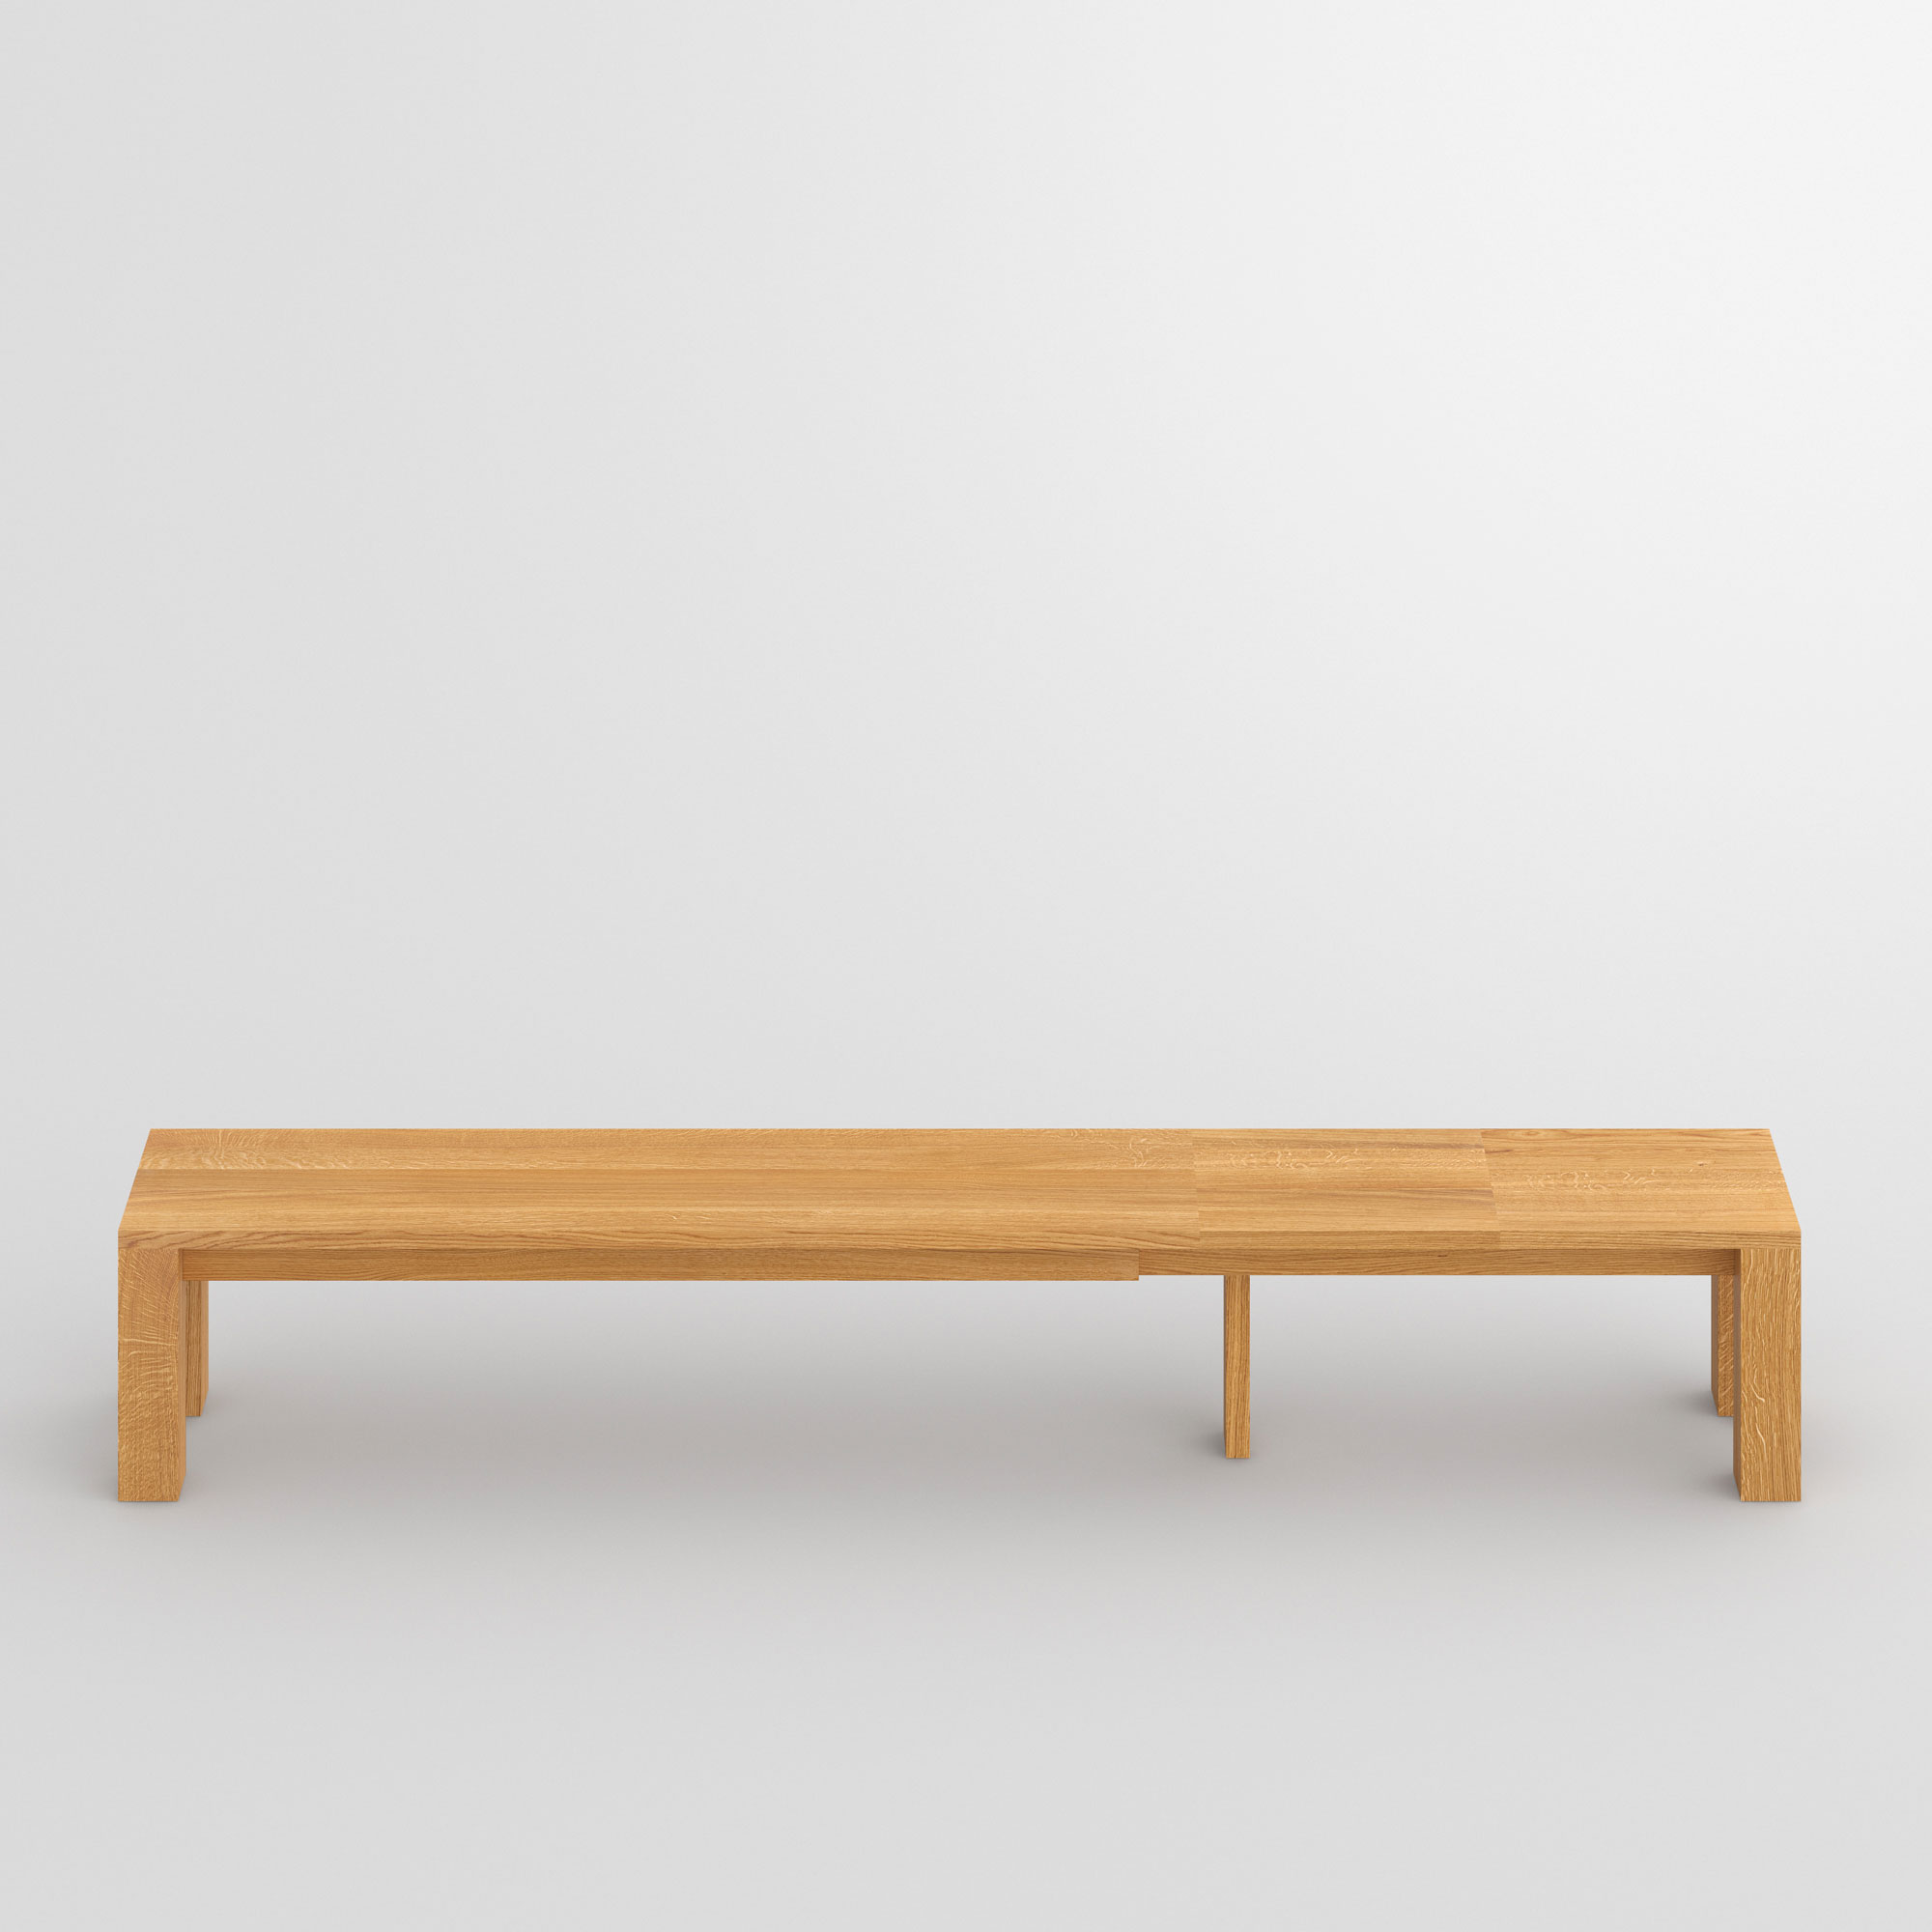 Extendable Bench CUBUS EP 3 cam2 custom made in solid wood by vitamin design